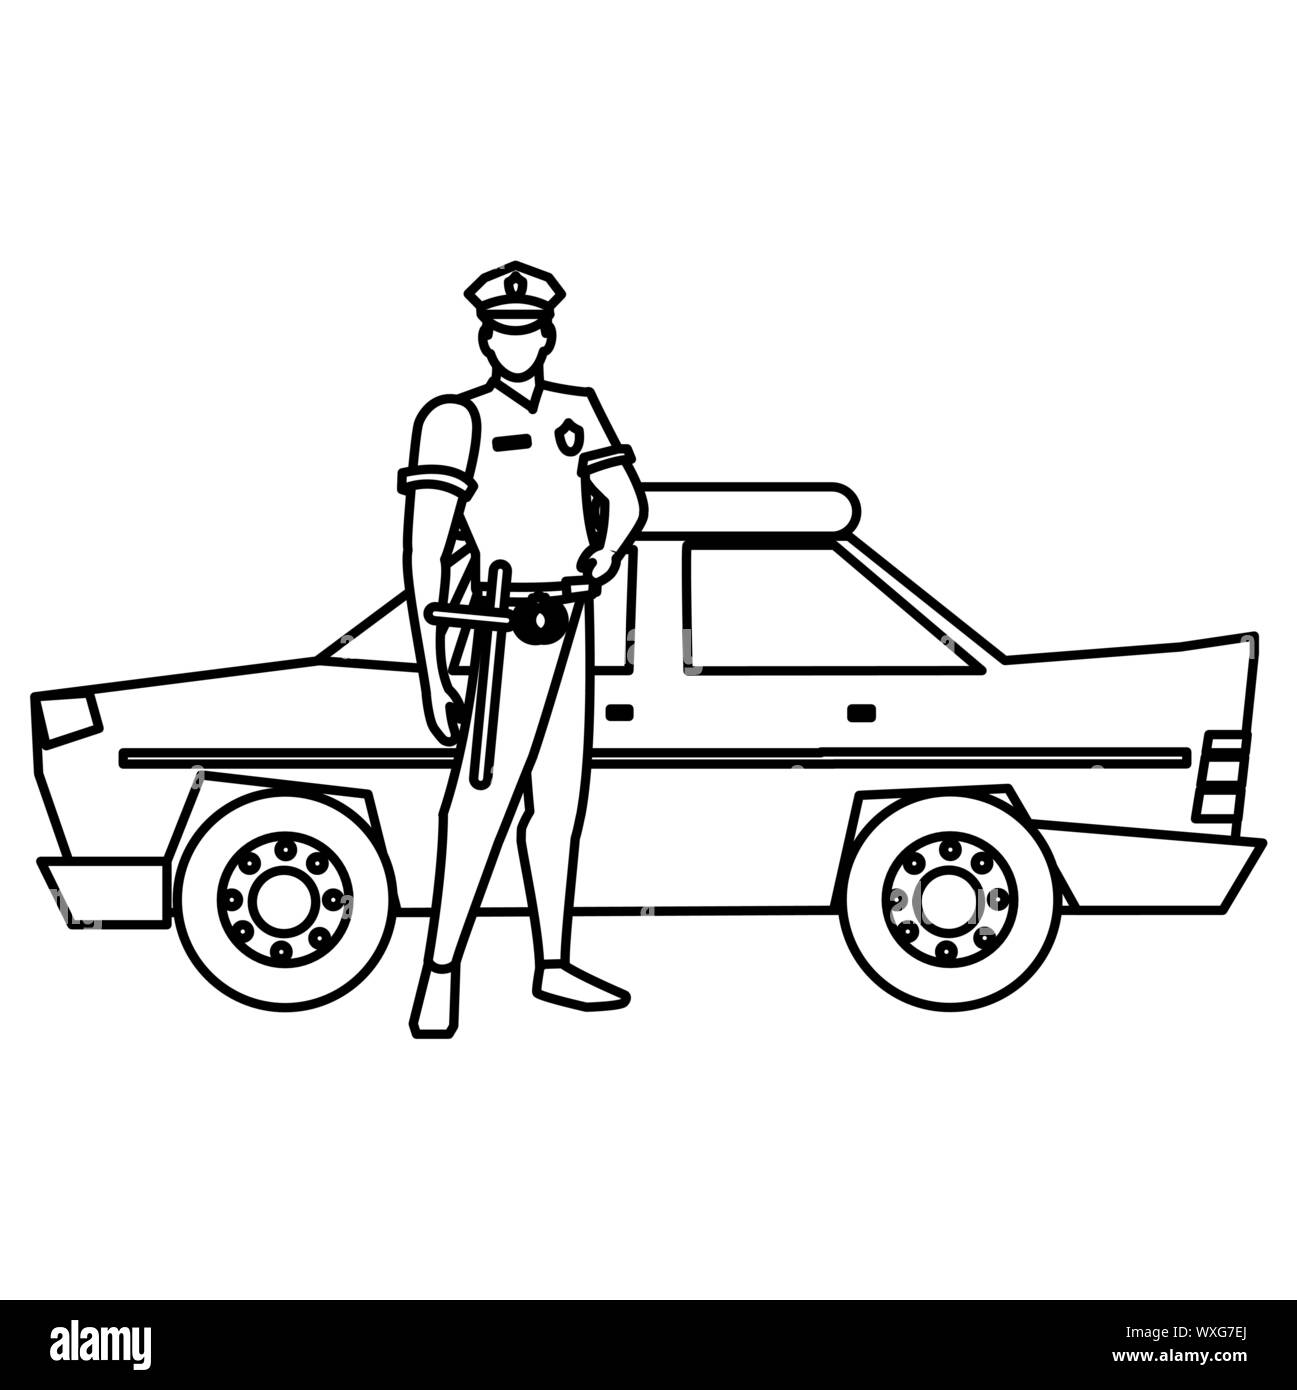 police officer and police car icon over white background, vector illustration Stock Vector